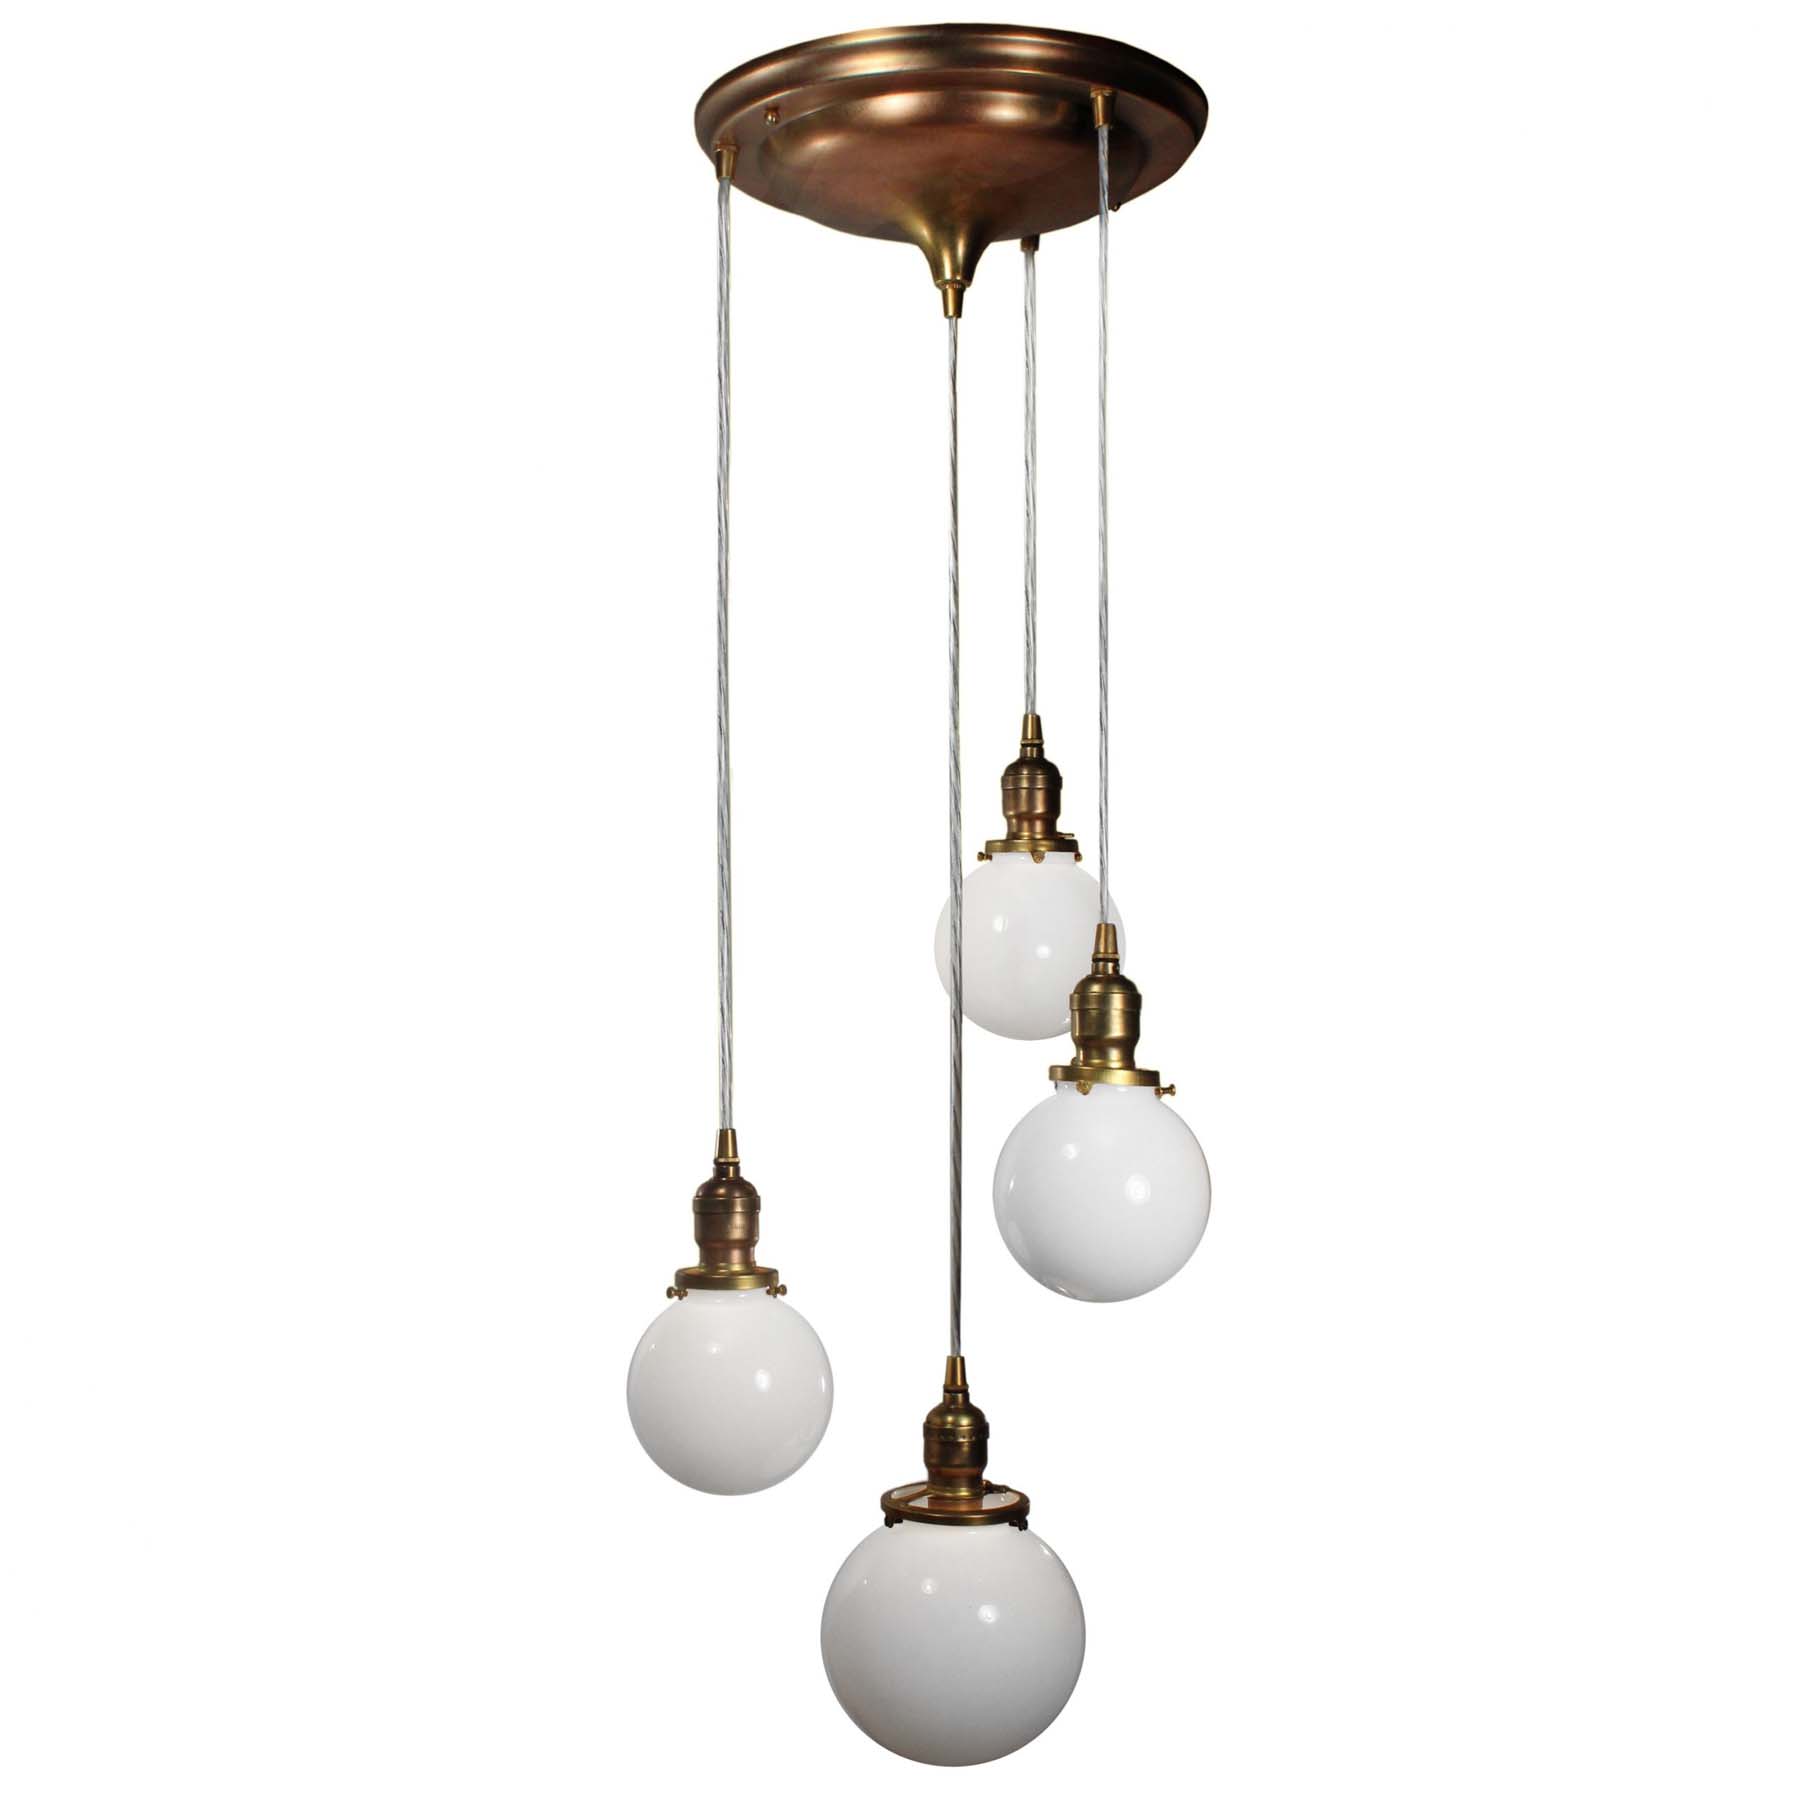 SOLD Semi Flush-Mount Chandelier with Ball Shades, Antique Lighting-70140